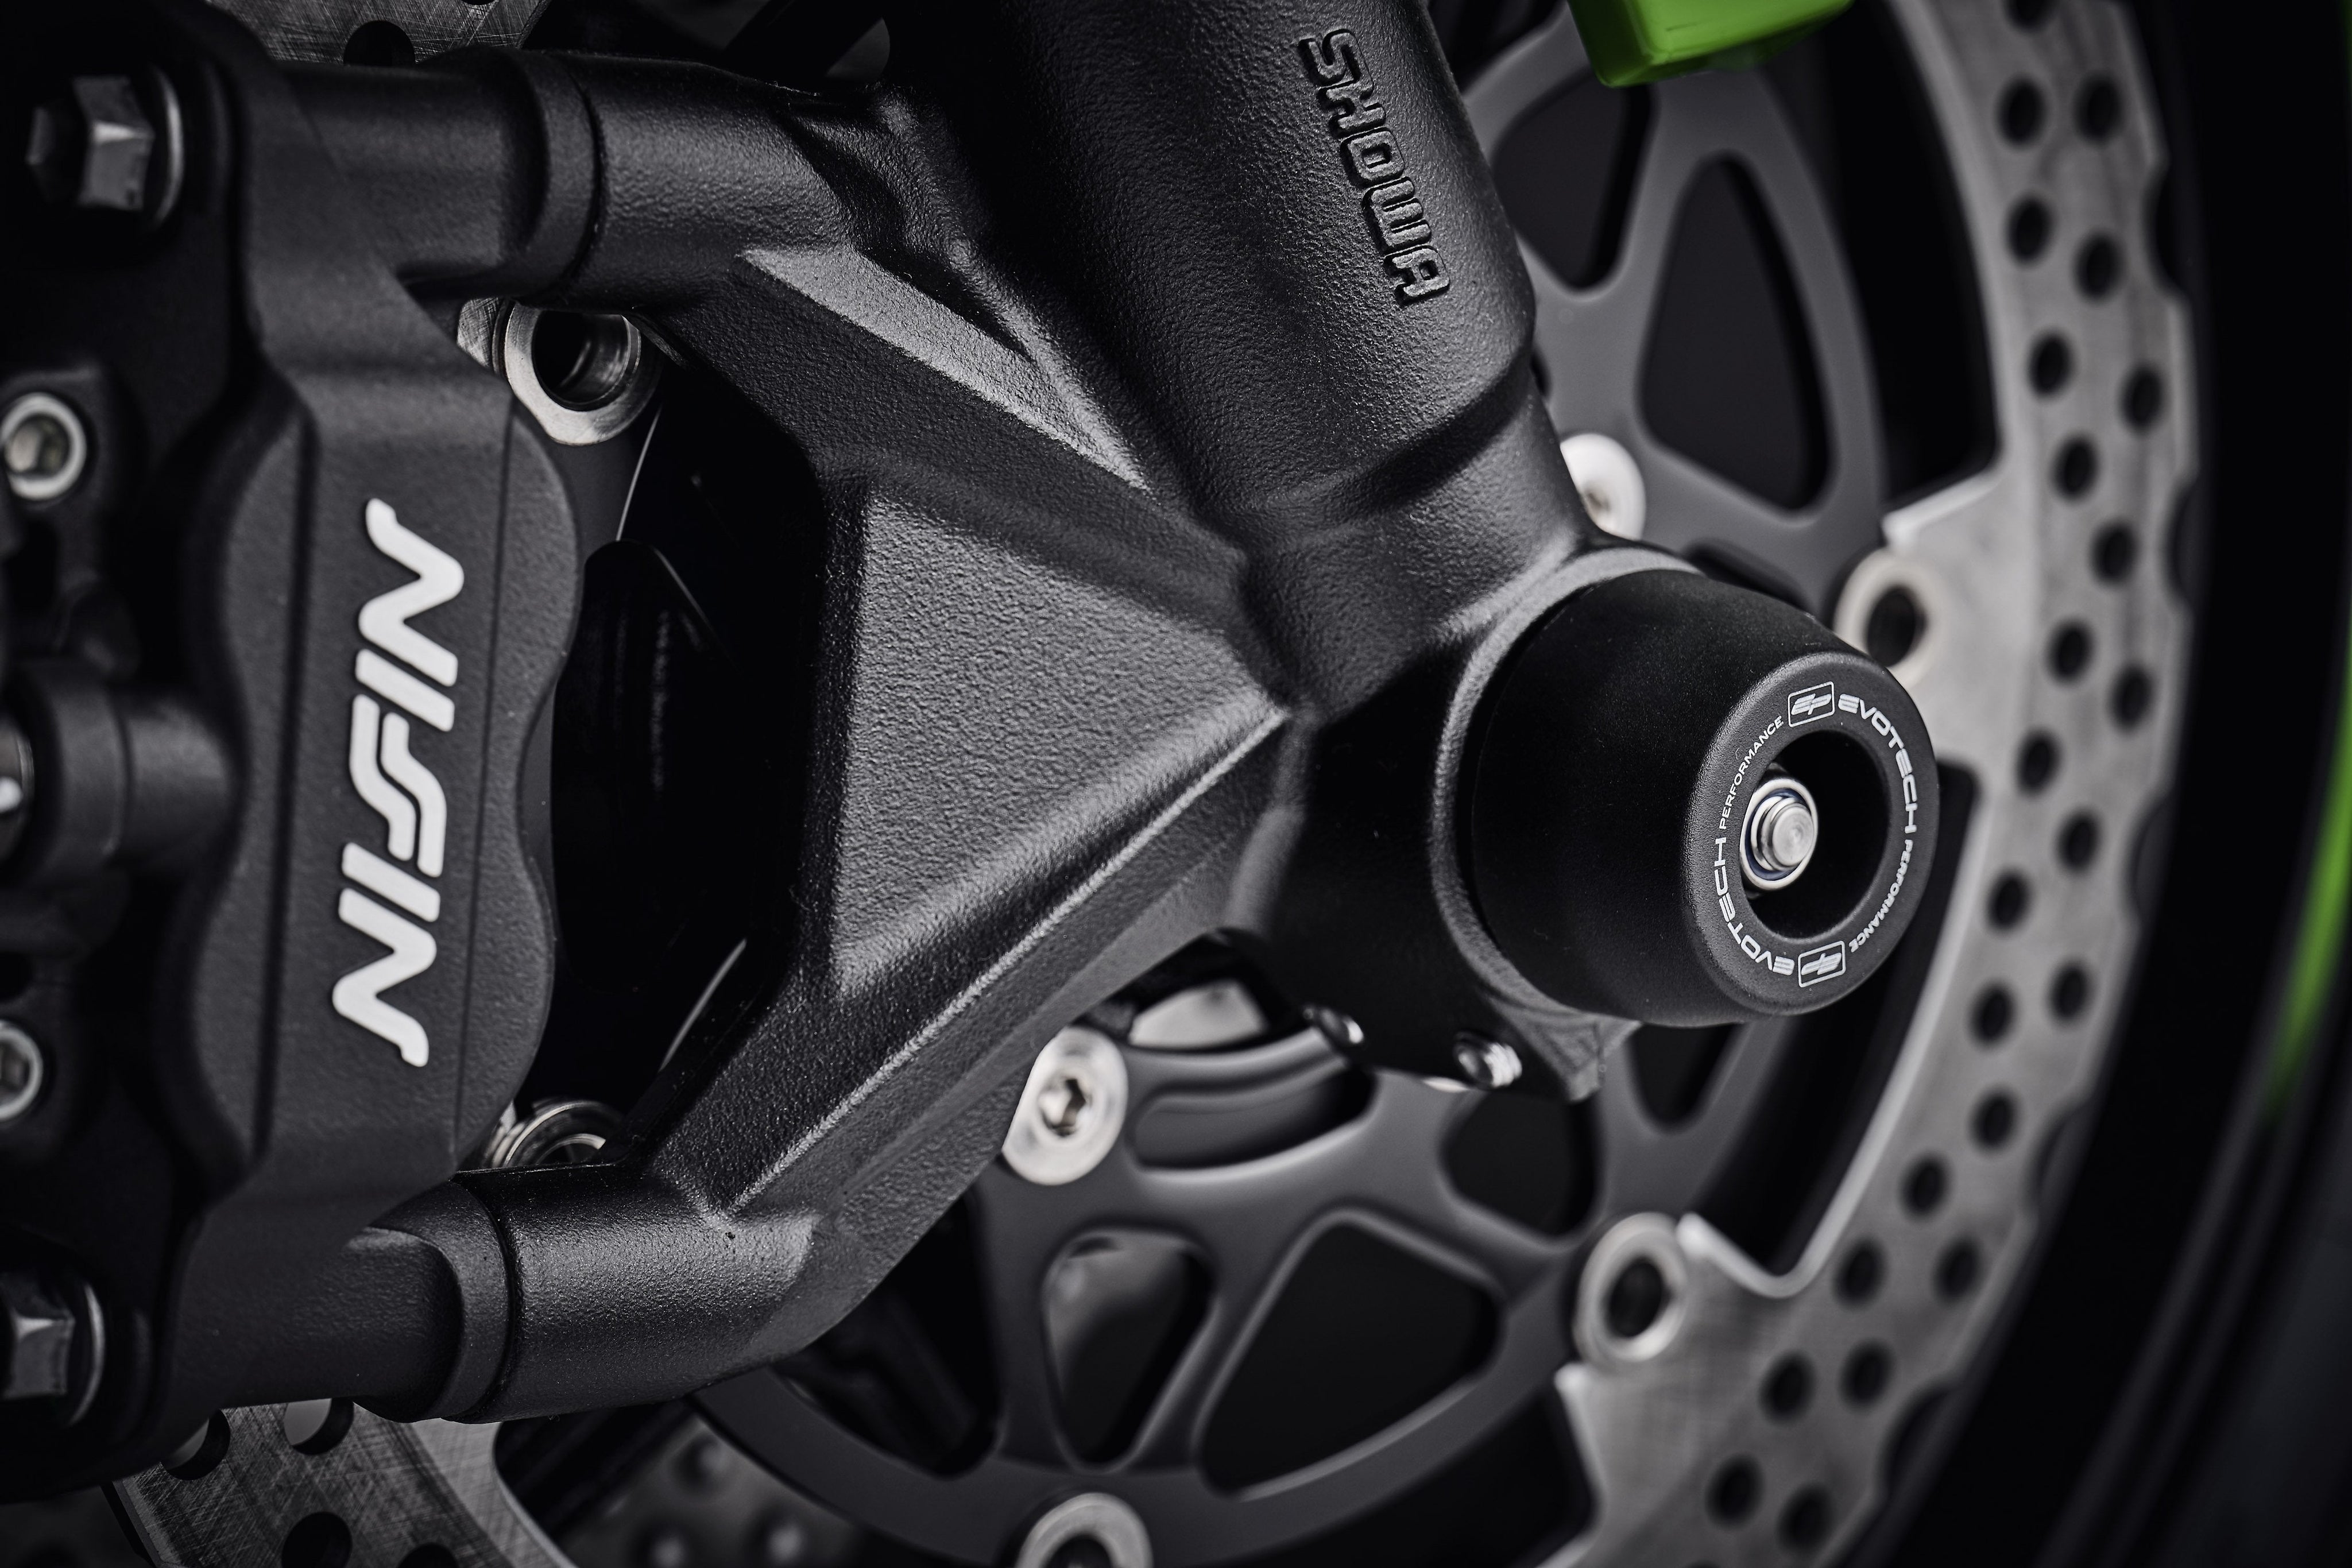 The signature EP Spindle Bobbins Kit precision fitted to the motorcycle, designed to blend with the front forks of the Kawasaki ZX6R.